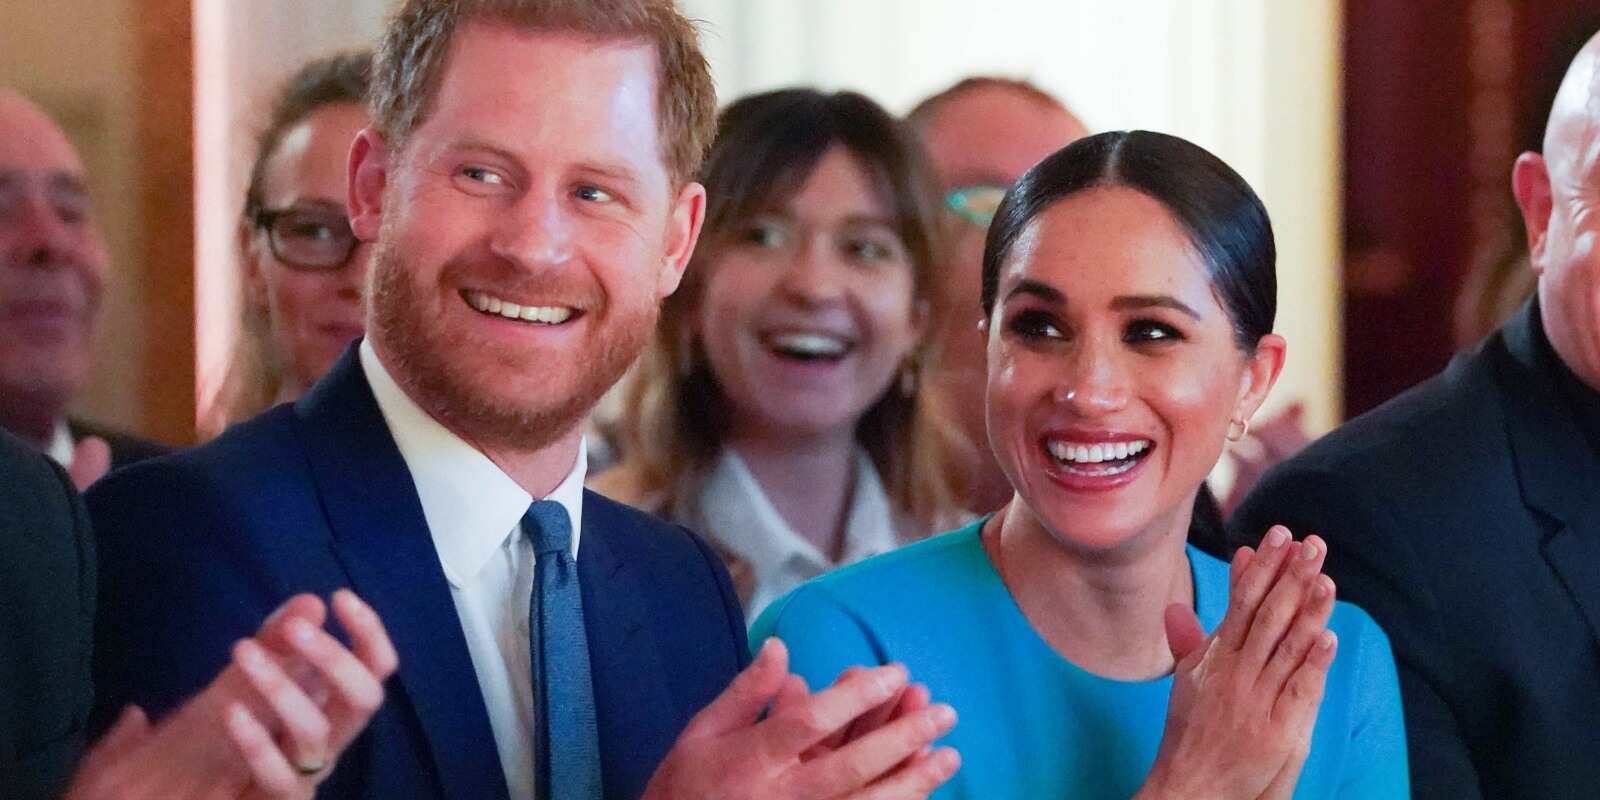 Prince Harry and Meghan Markle clapping at the annual Endeavour Fund Awards at Mansion House on March 5, 2020 in London, England.